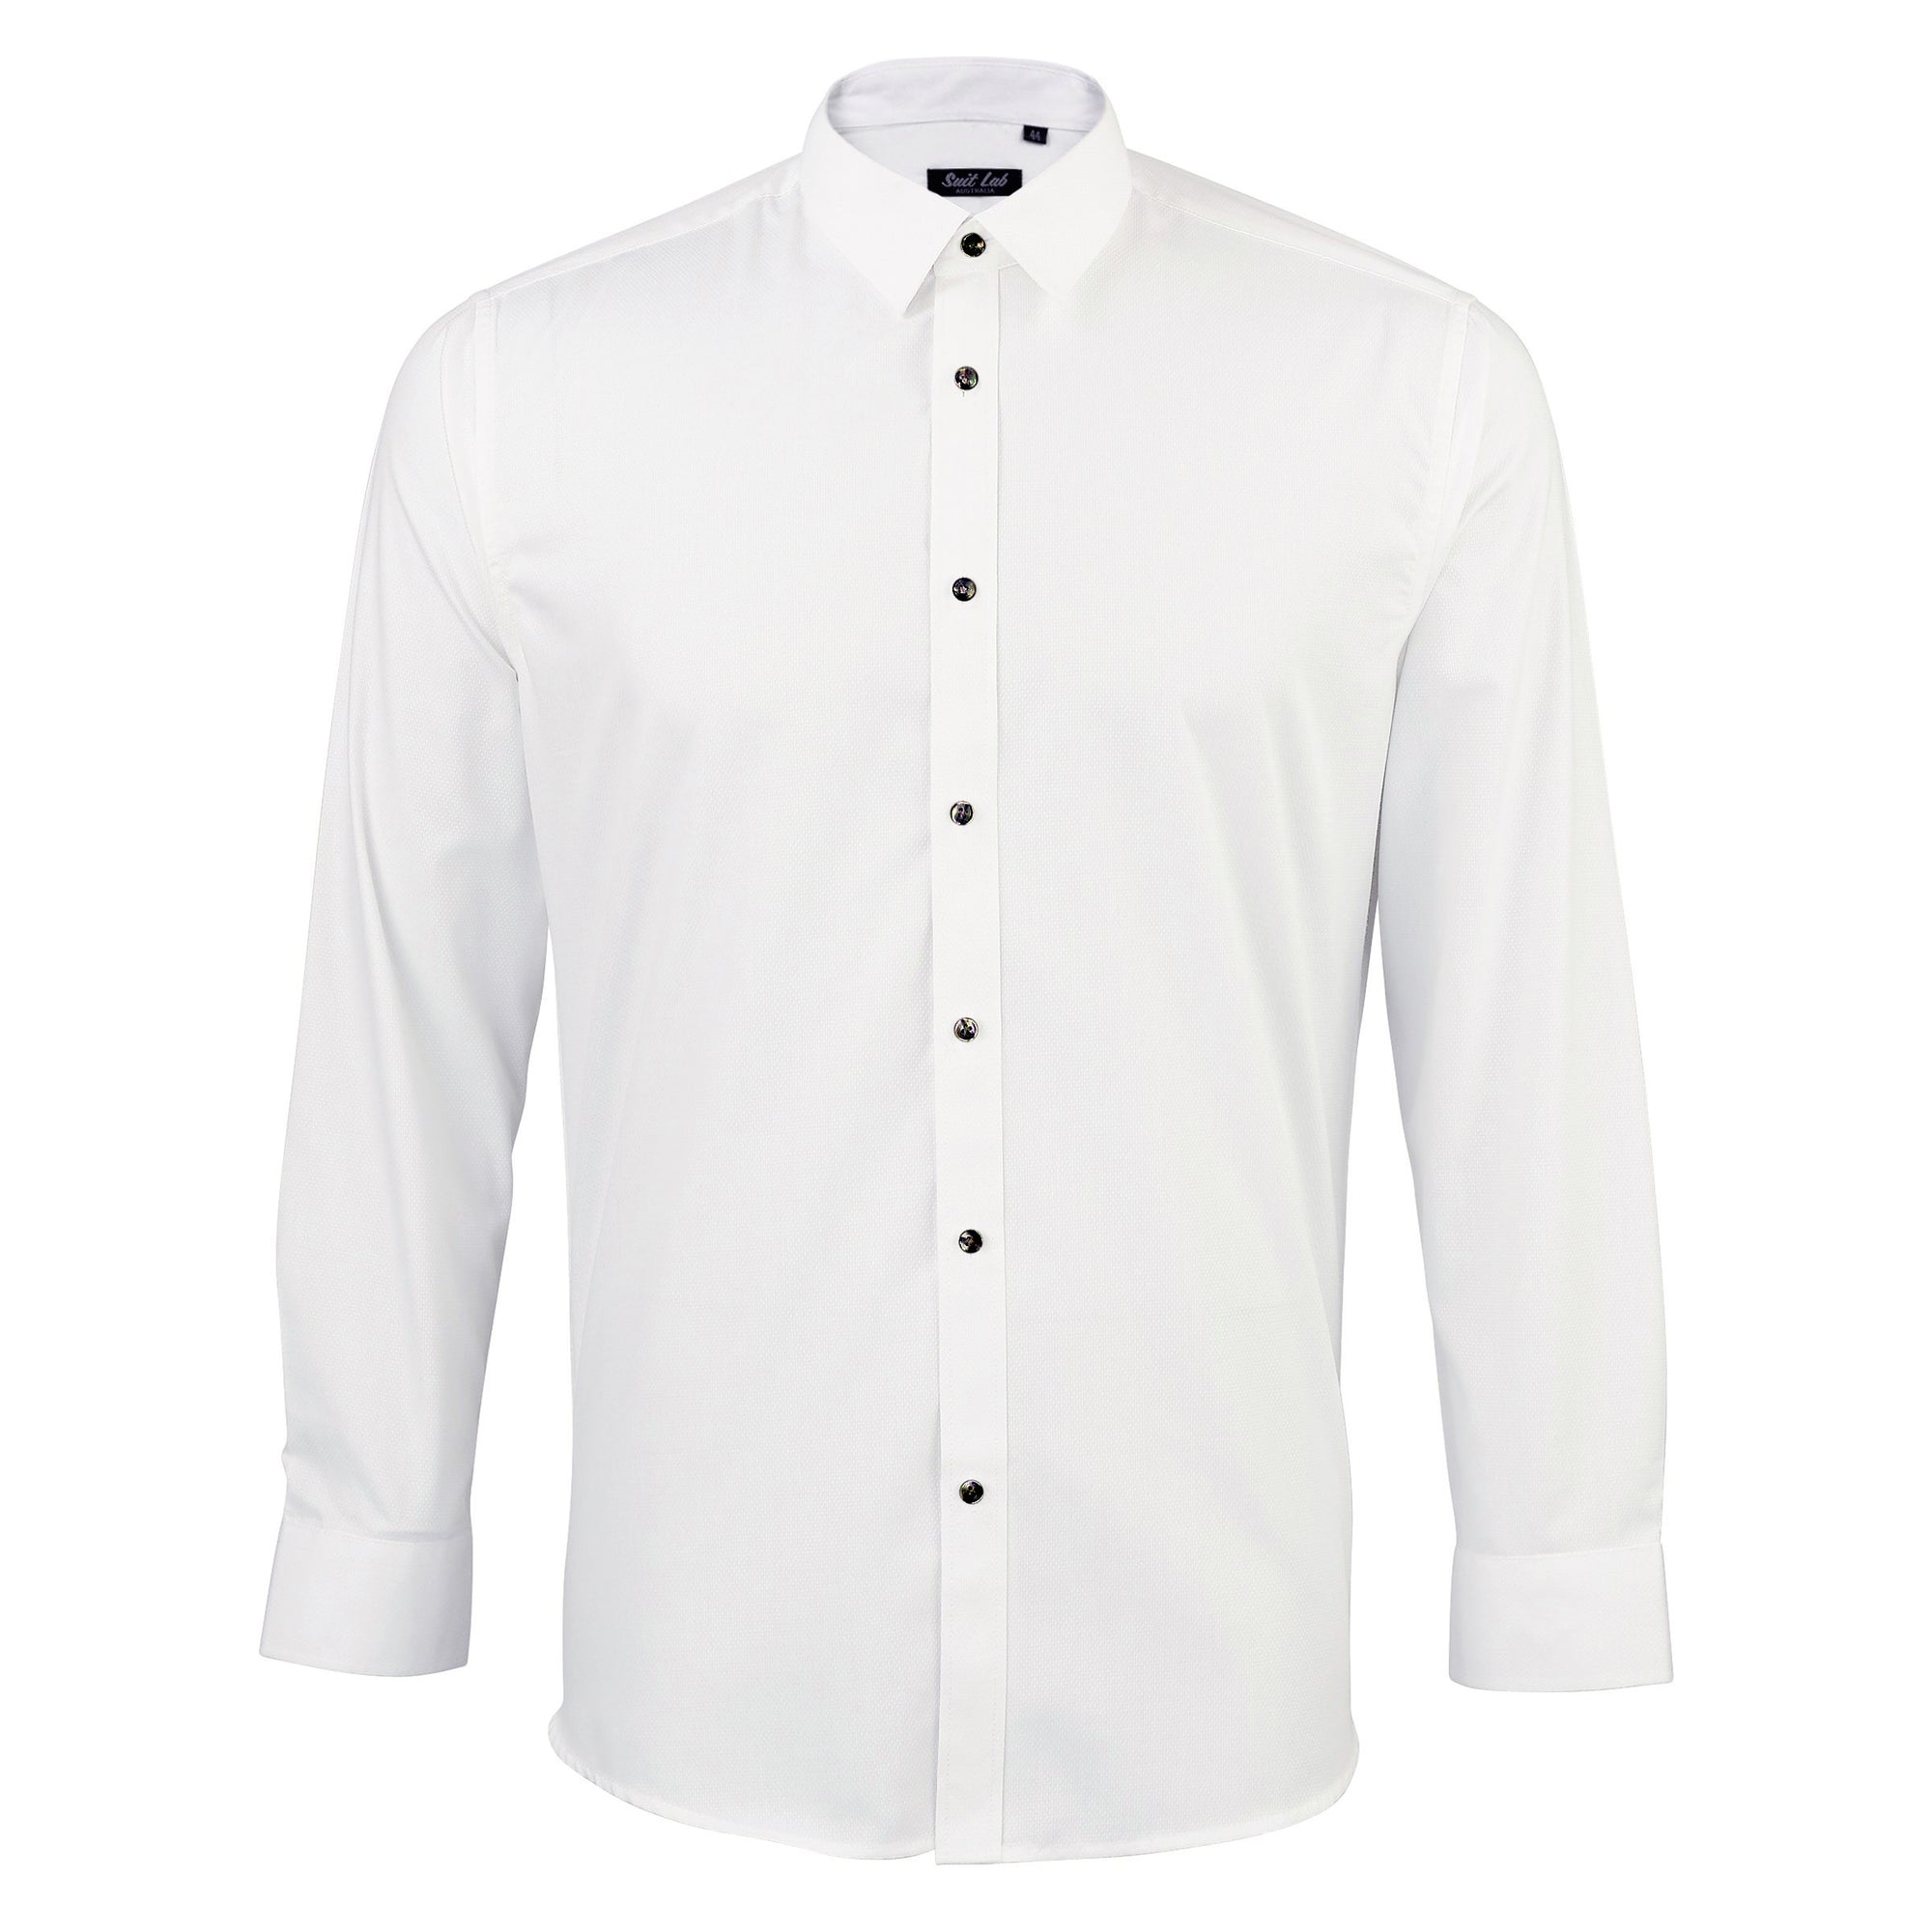 Mens Soft White Textured Shirt with Black Buttons